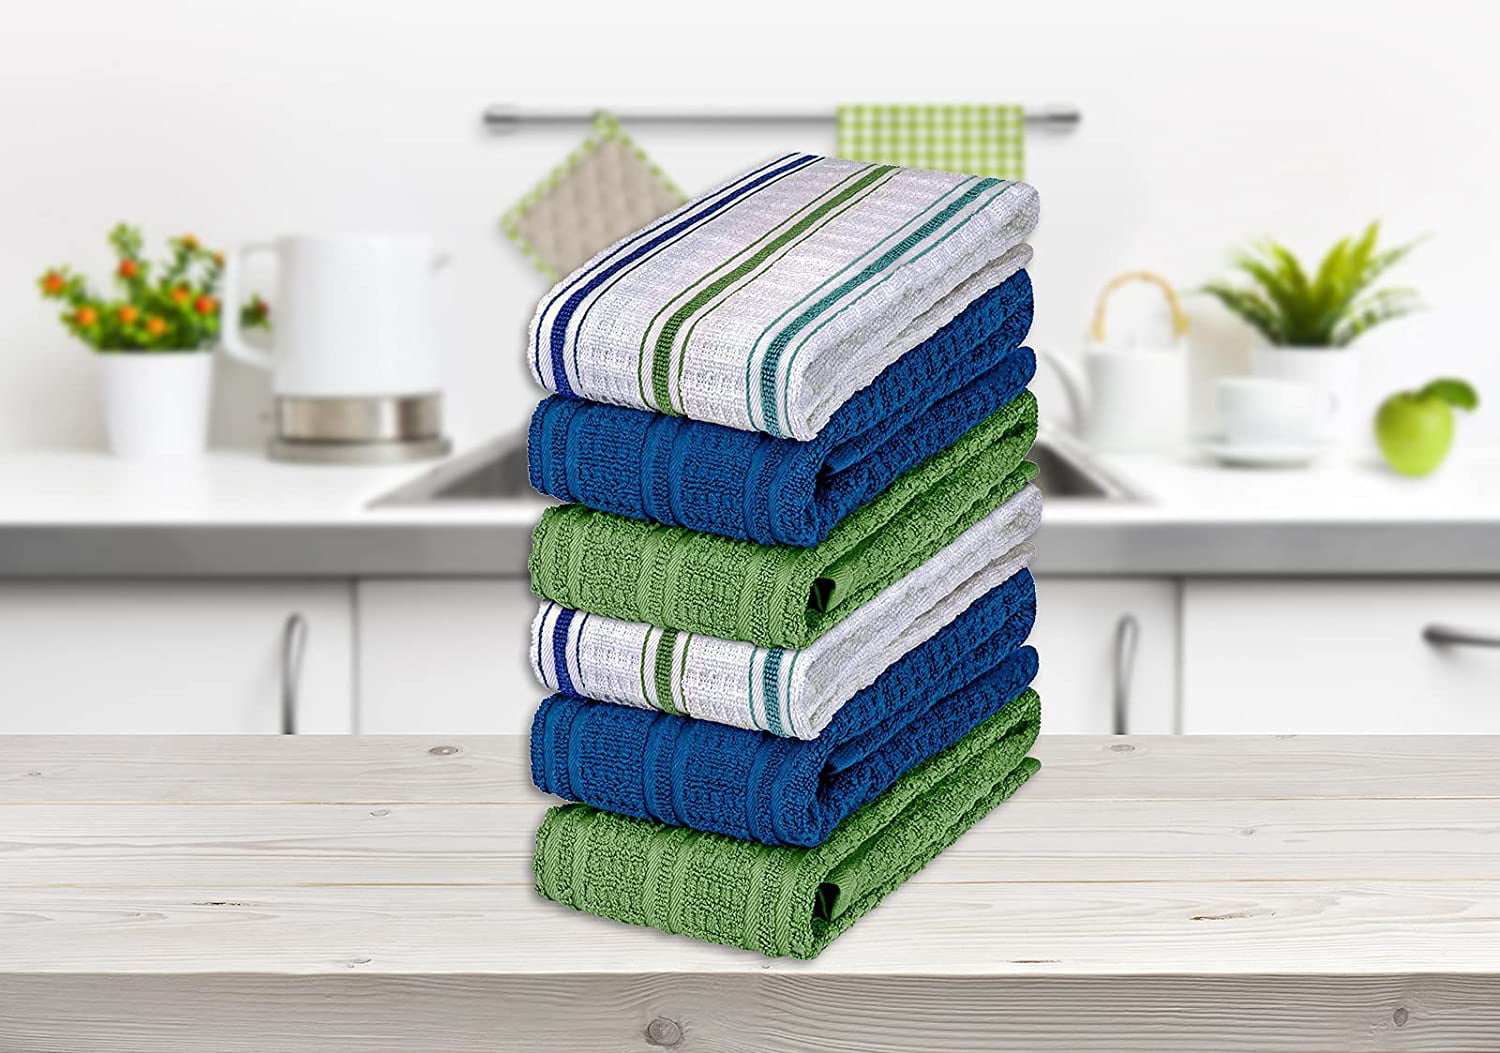 TOWN & COUNTRY LIVING ORGANIC KITCHEN TOWELS GREEN 16 X 28 100% COTTON NWT